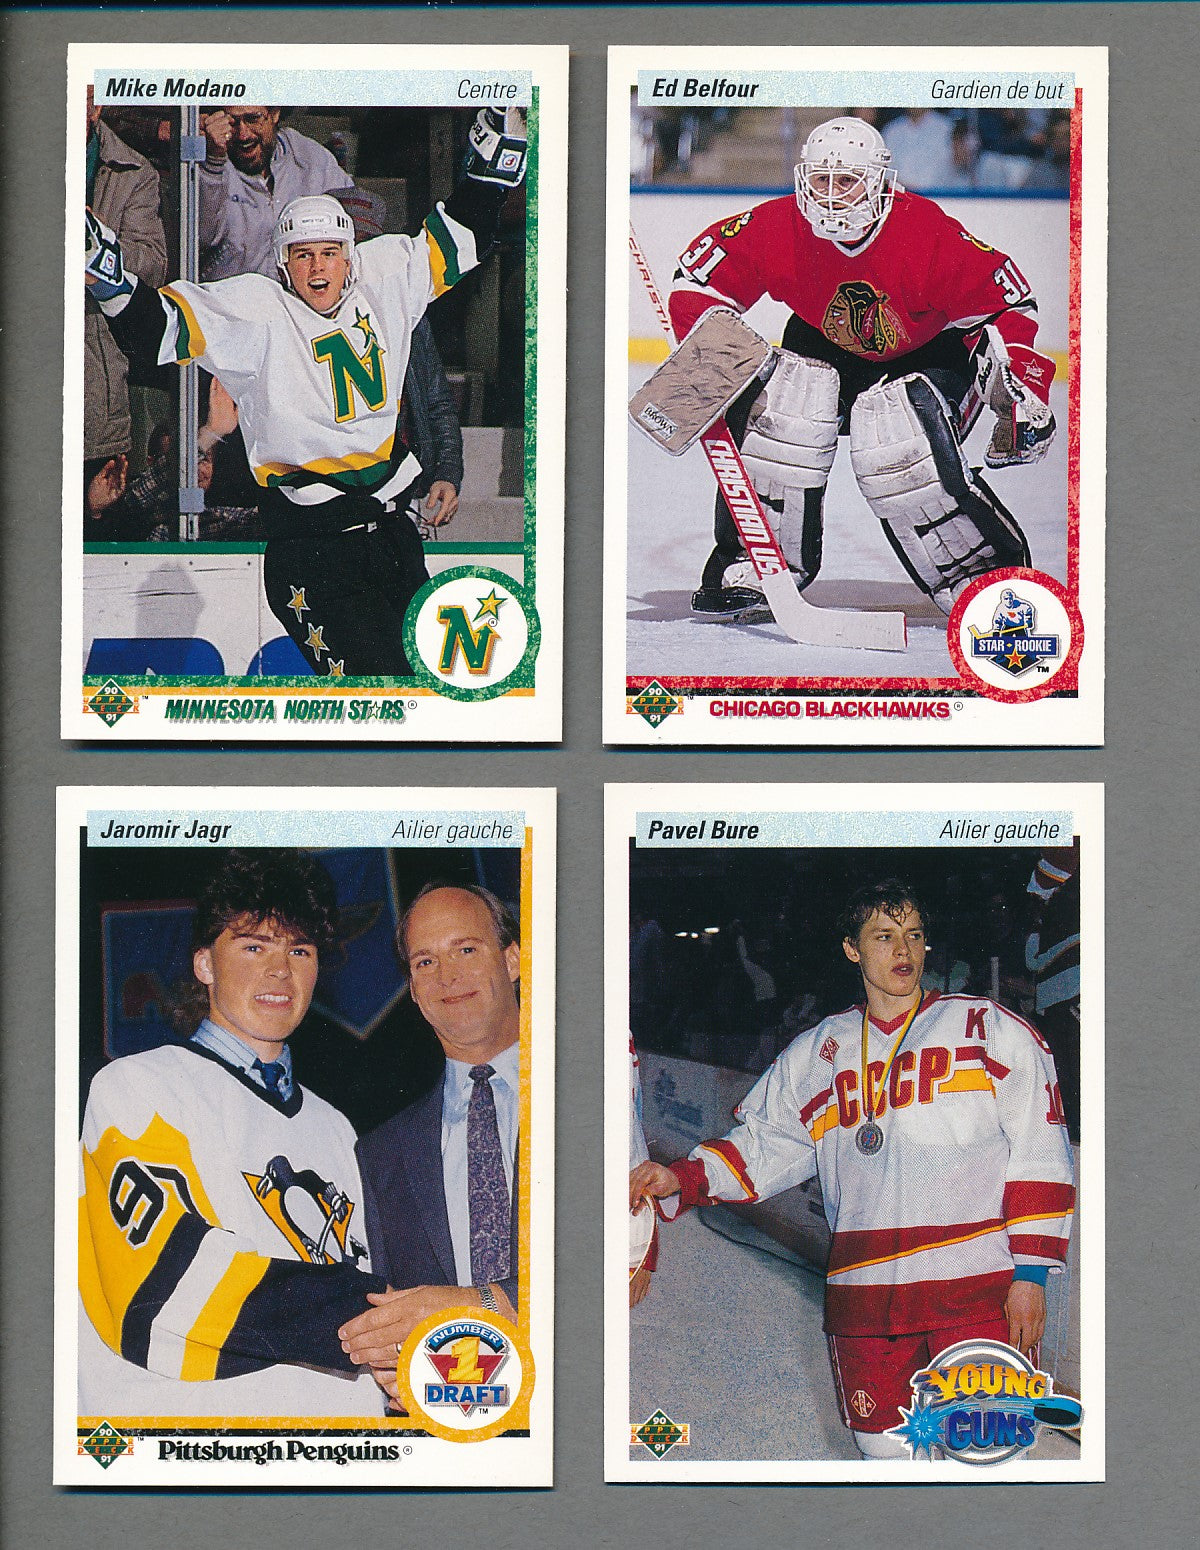 1990/91 Upper Deck Hockey Complete Set (French) (550)  NM/MT MT